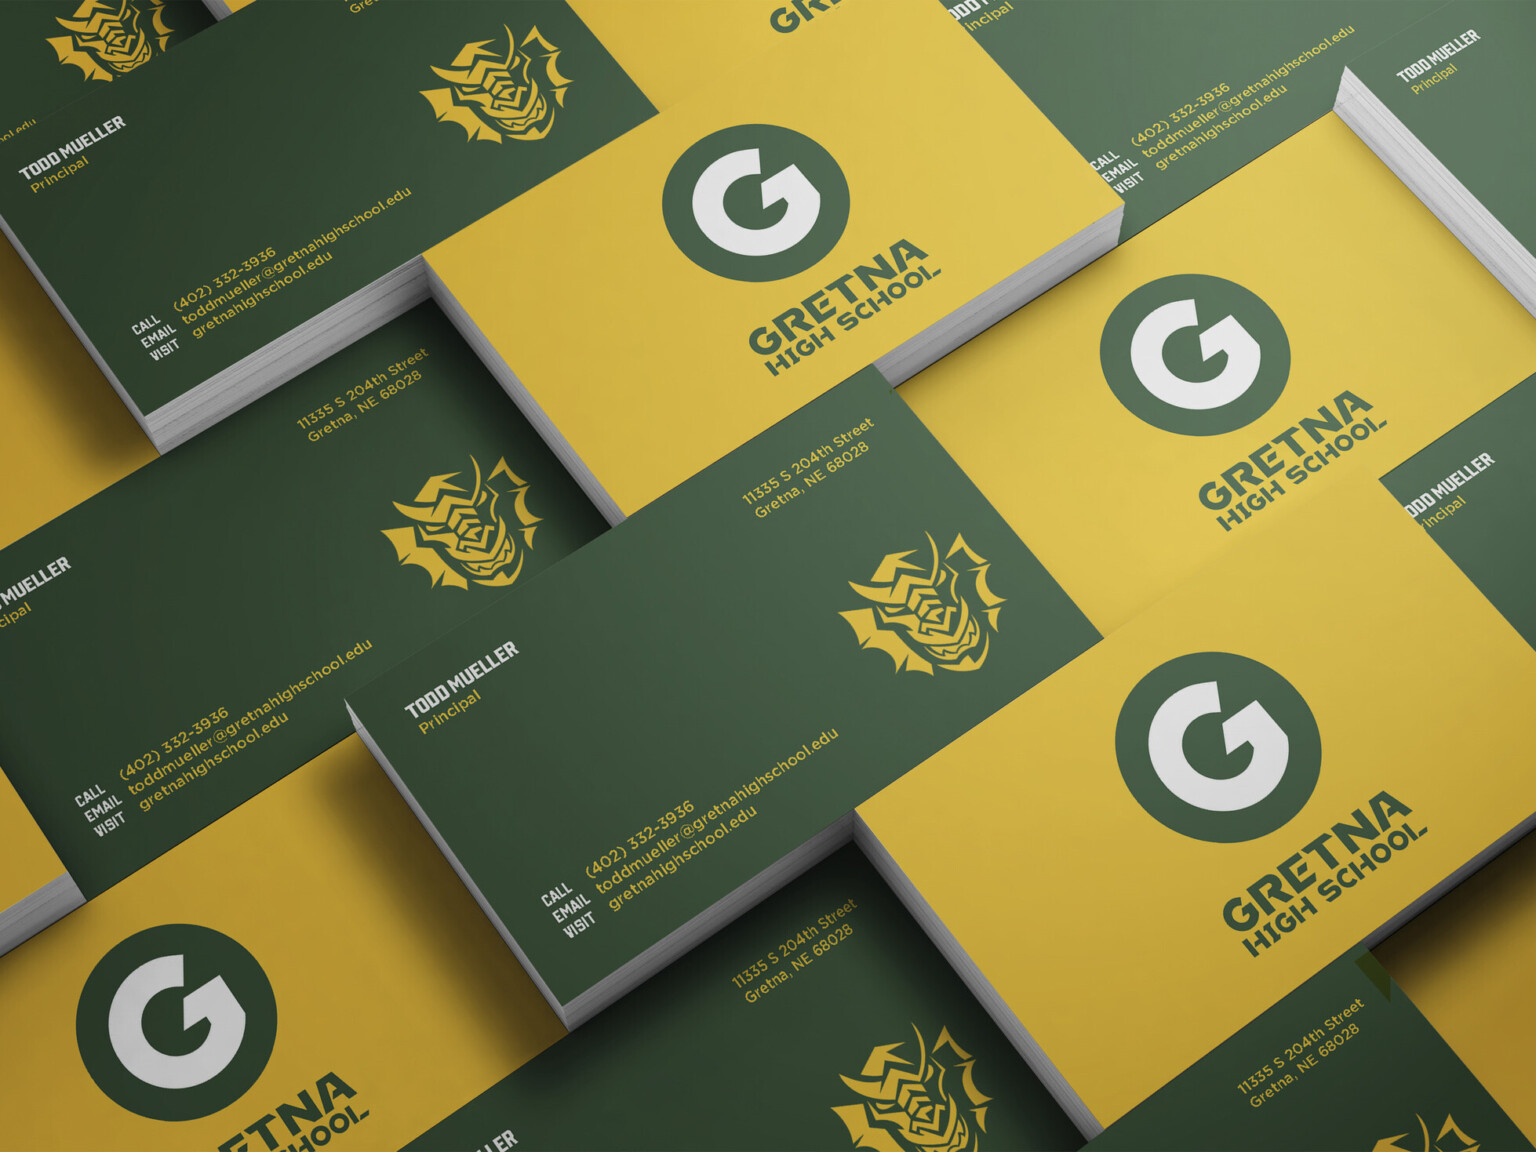 Green and yellow business cards with Gretna High School logo on yellow side